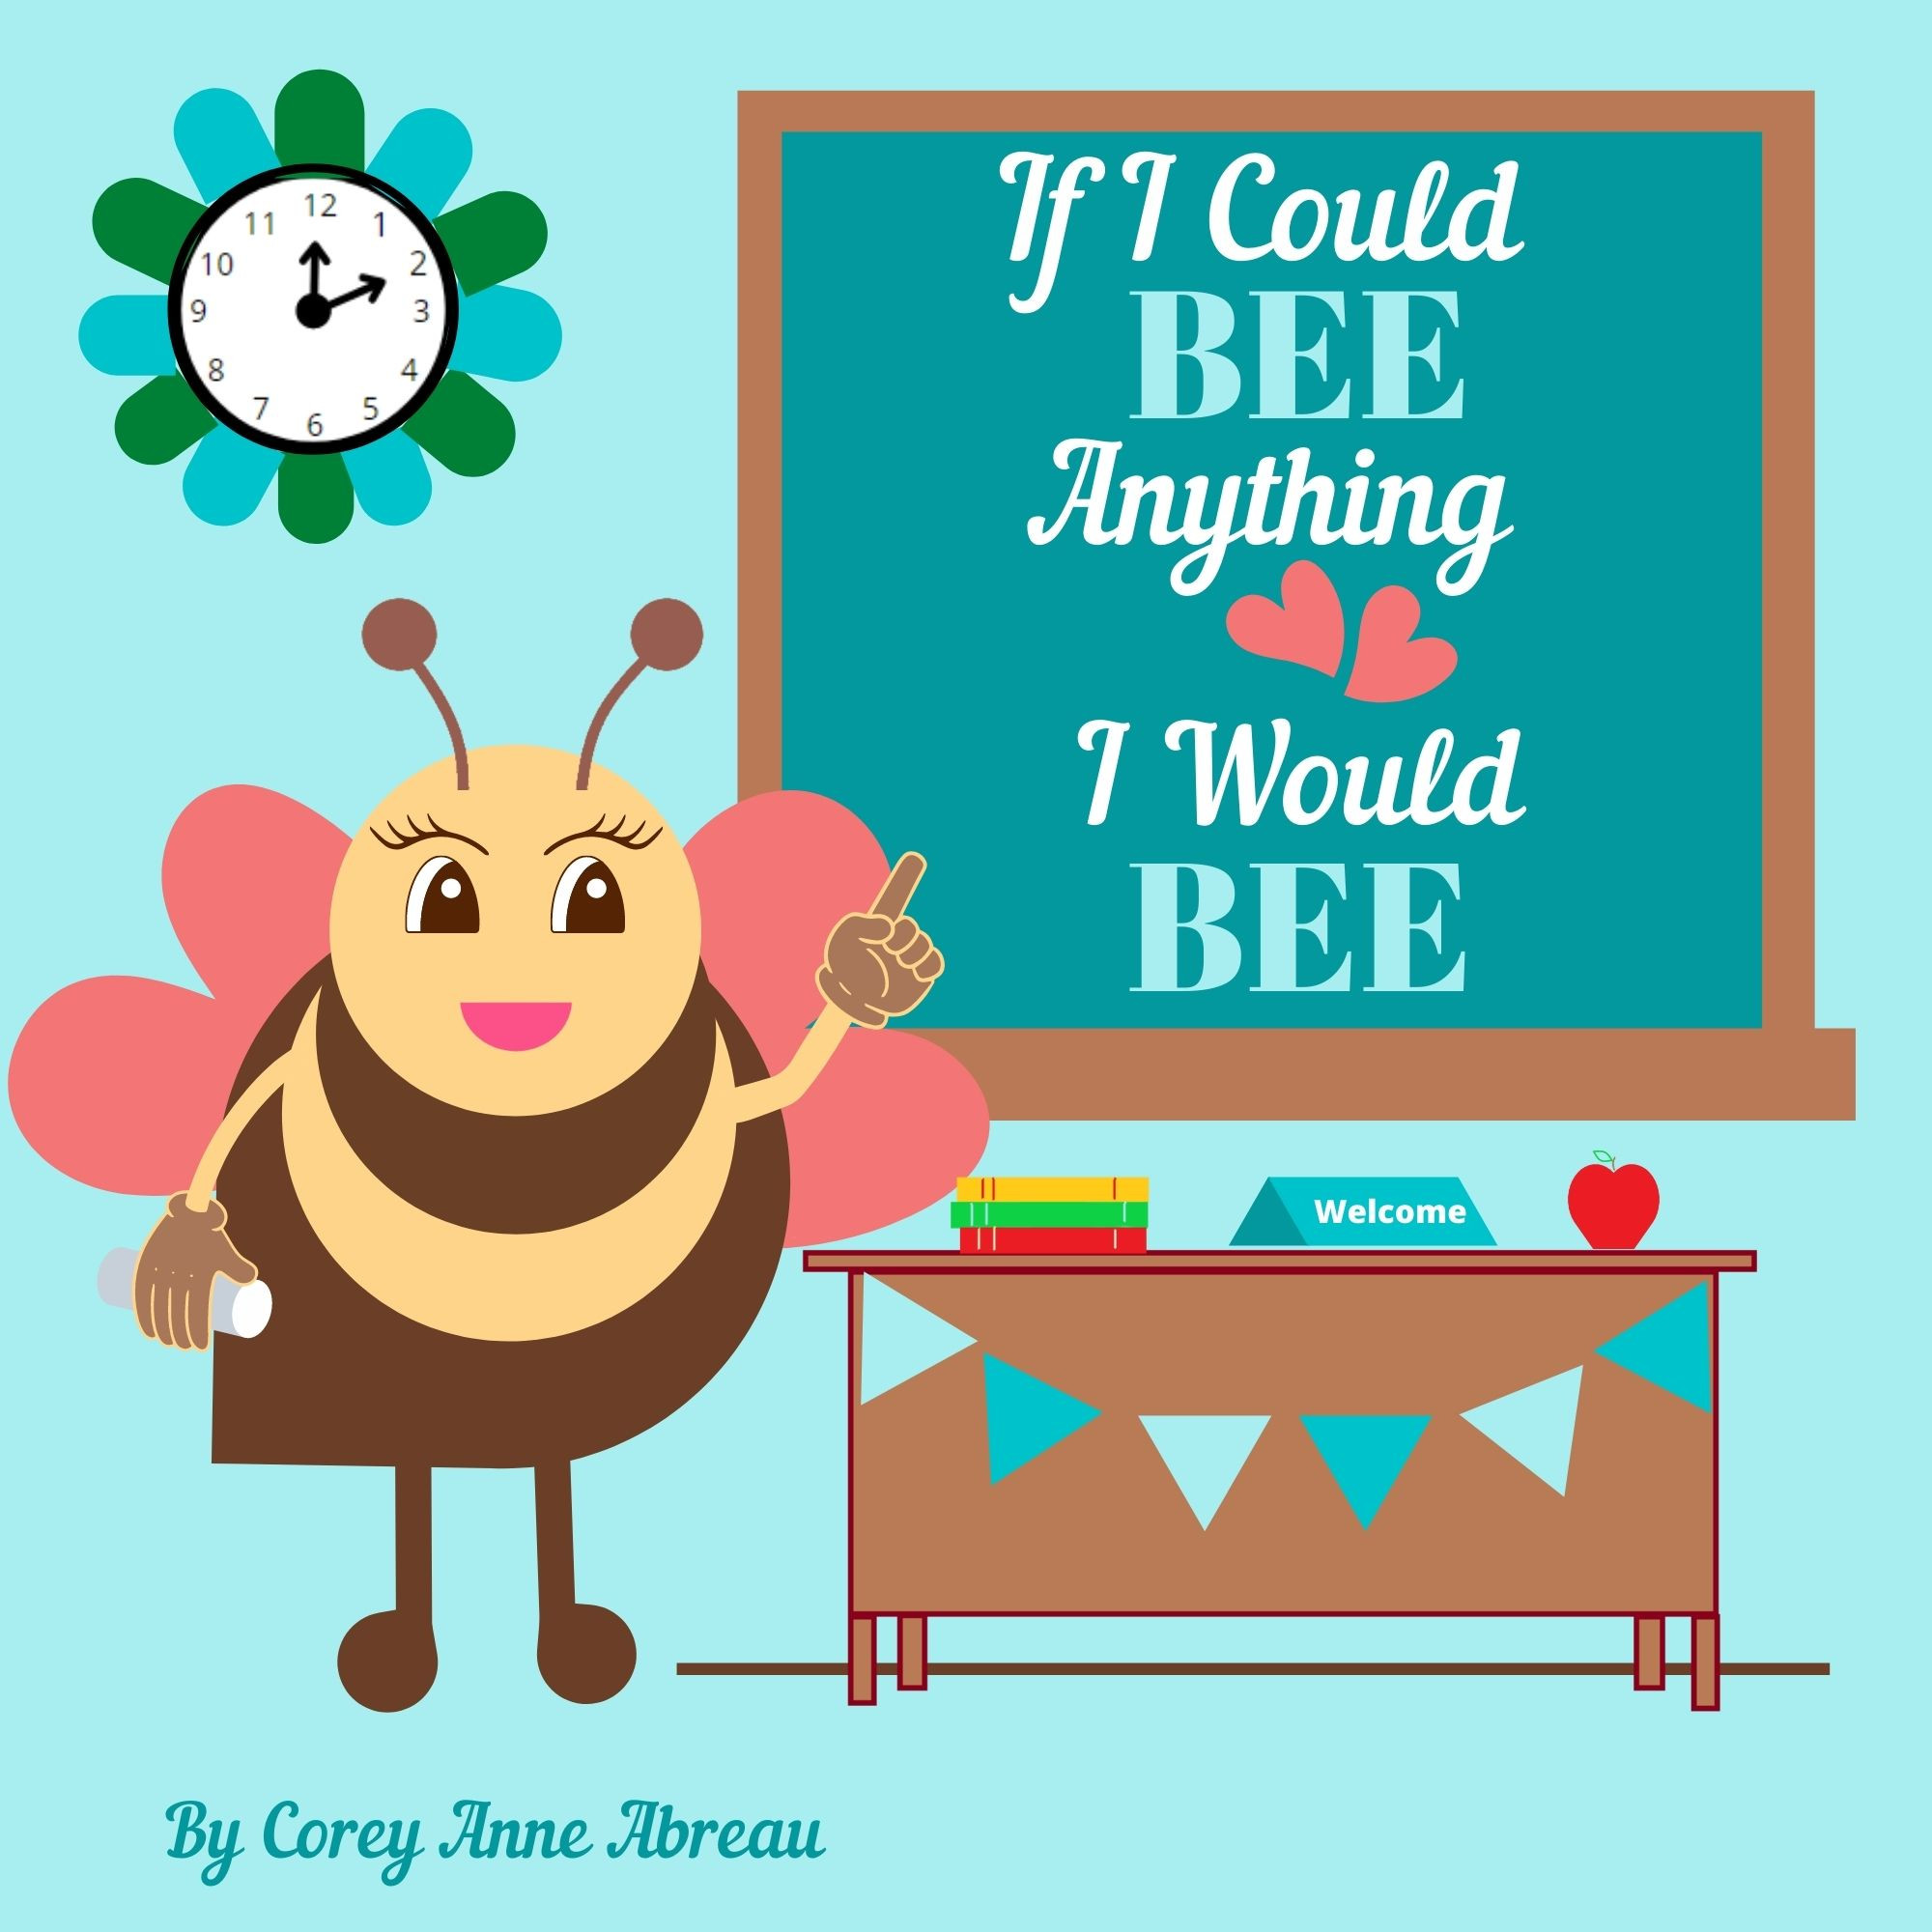 If I Could BEE Anything I Would BEE